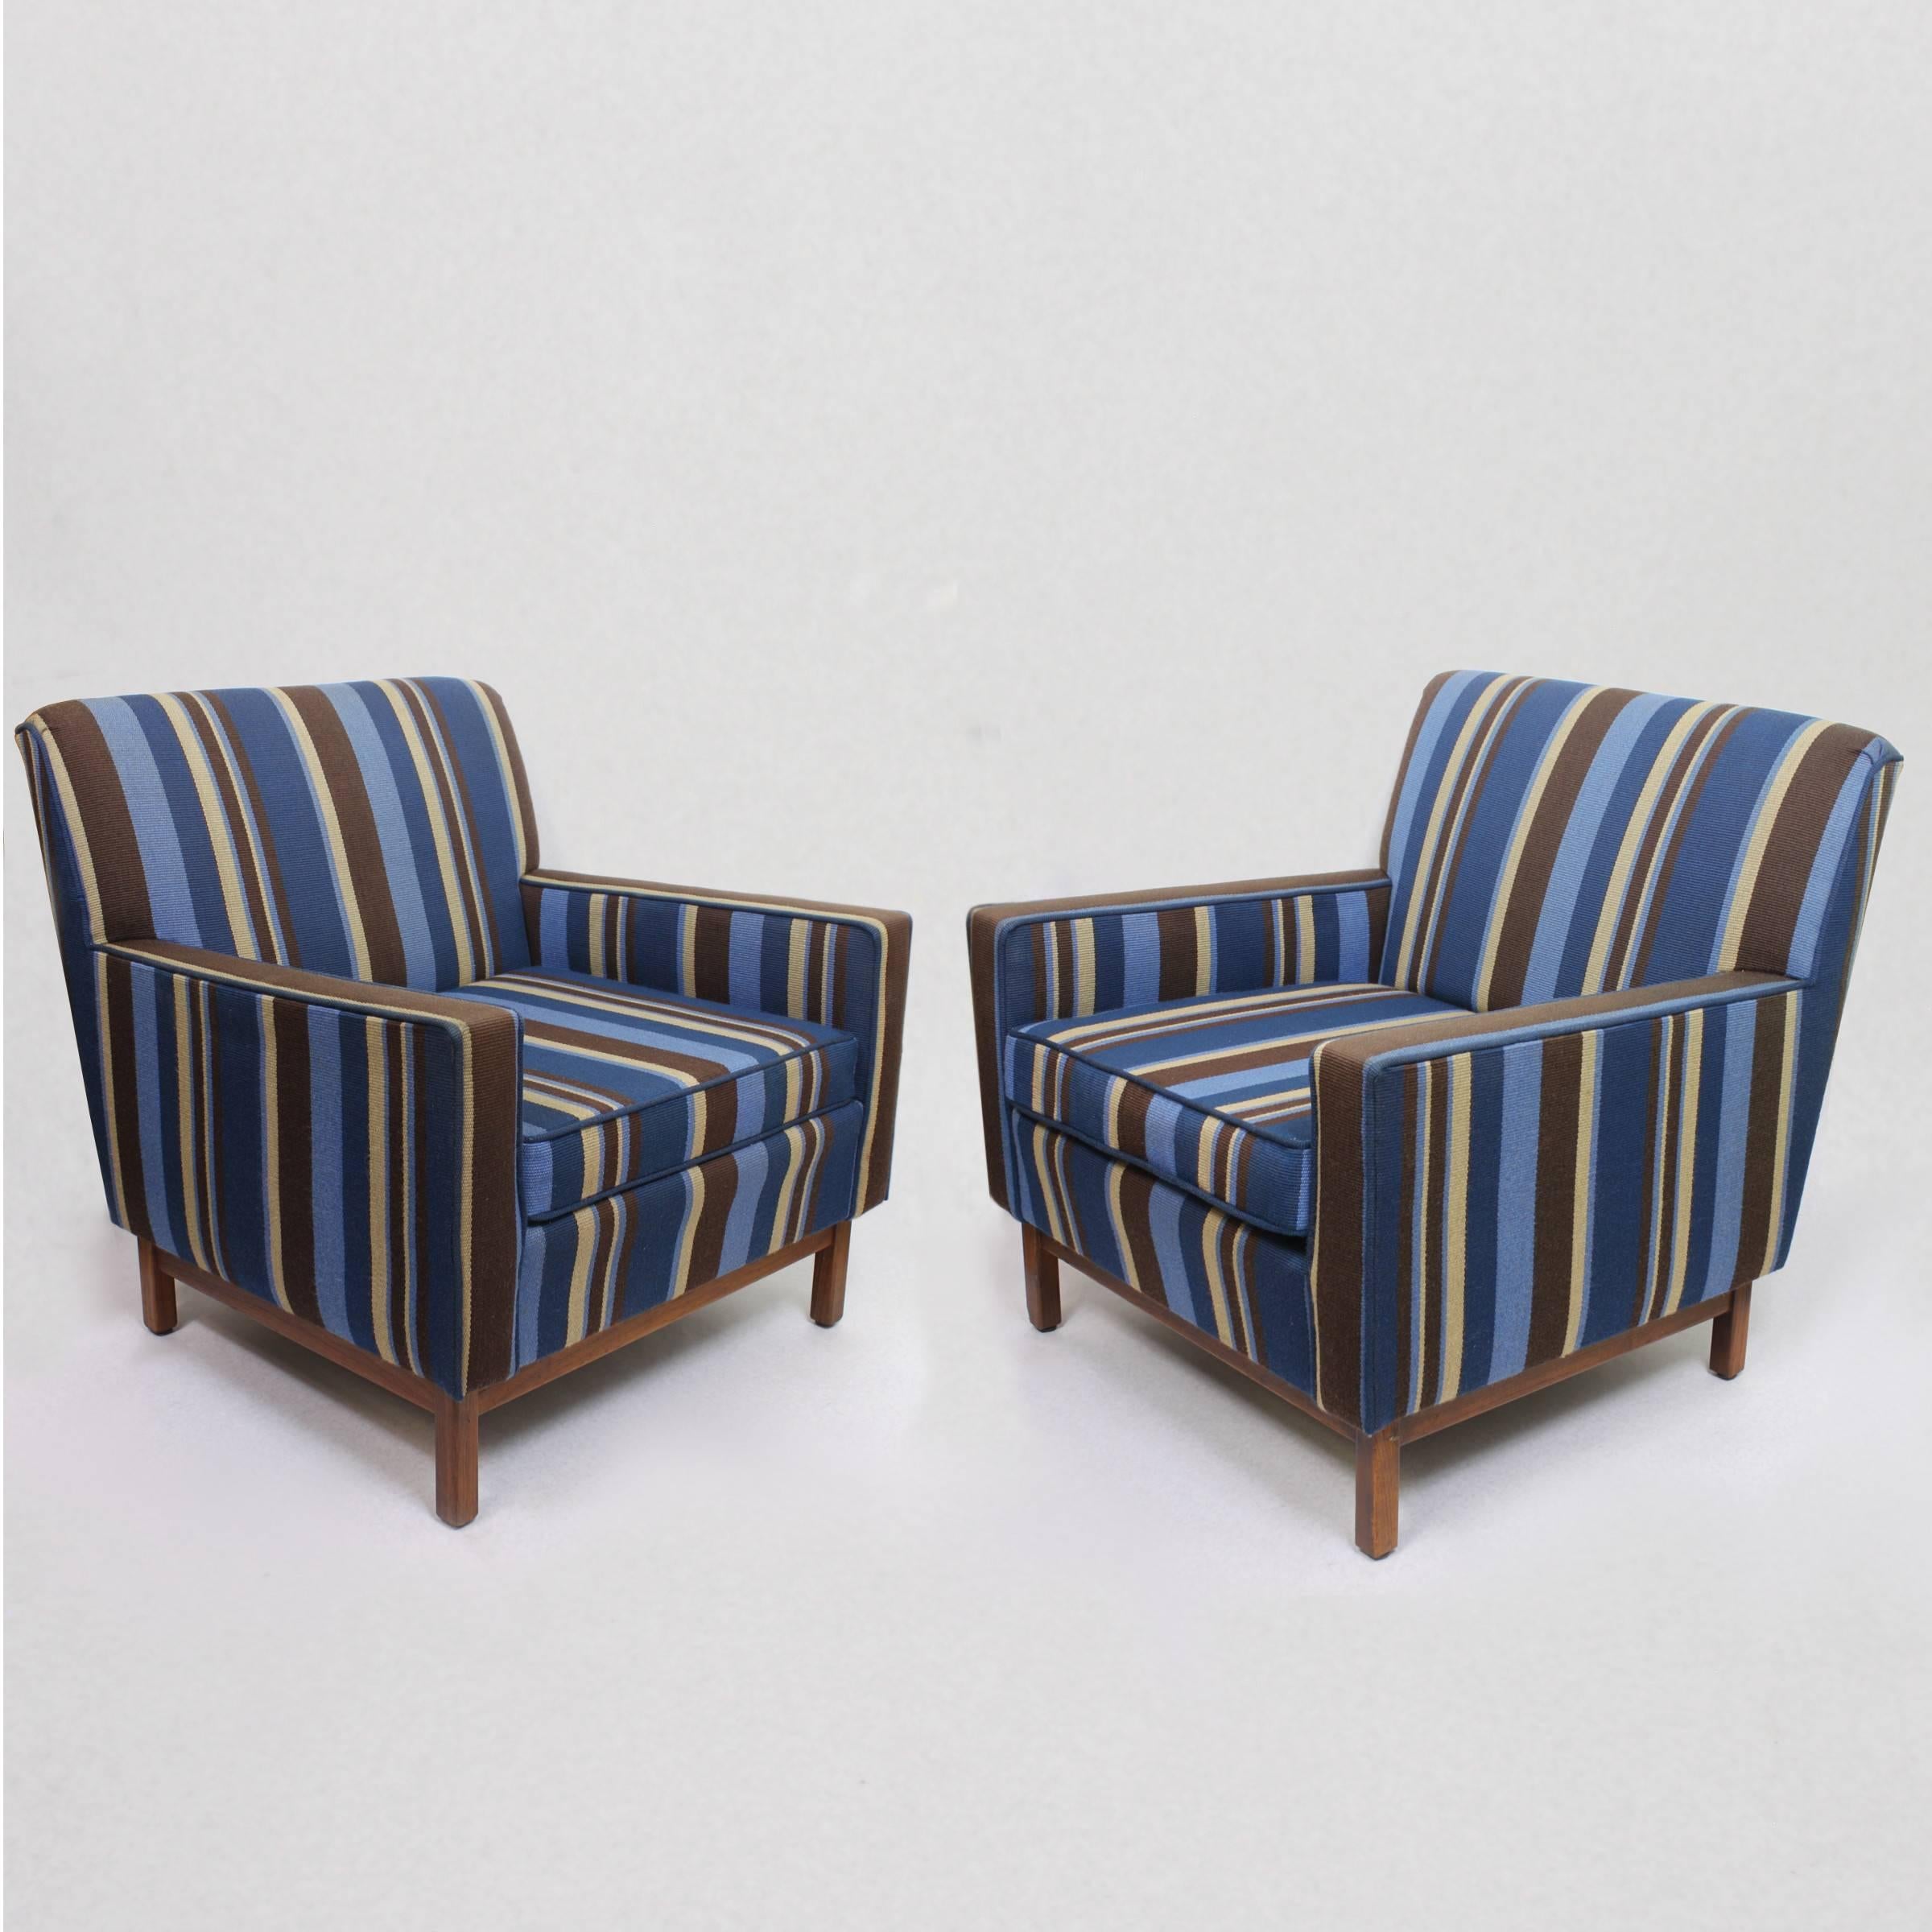 This wonderful set of matching vintage club chairs were manufactured by the famed Gunlocke Chair Company of Wayland, NY. Chairs feature a fantastic original wool upholstery with vibrant navy blue, sky blue, mocha brown, and tan stripes. Chair bases